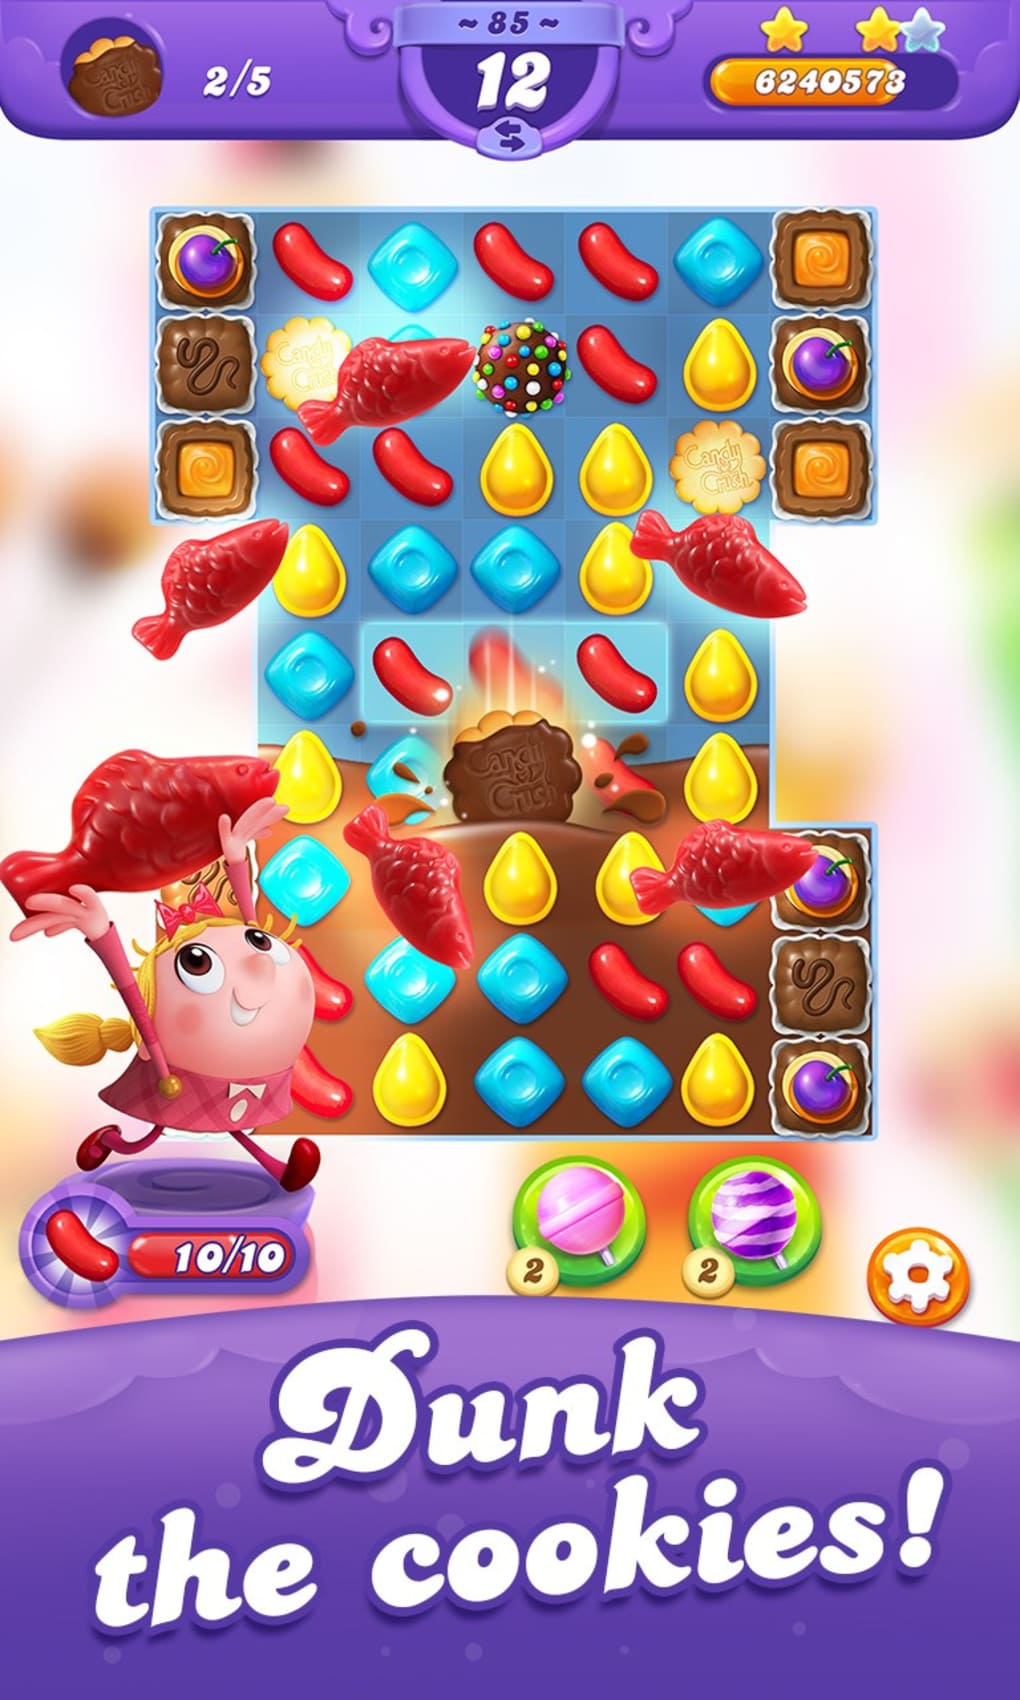 Candy Crush Friends Saga download the last version for android